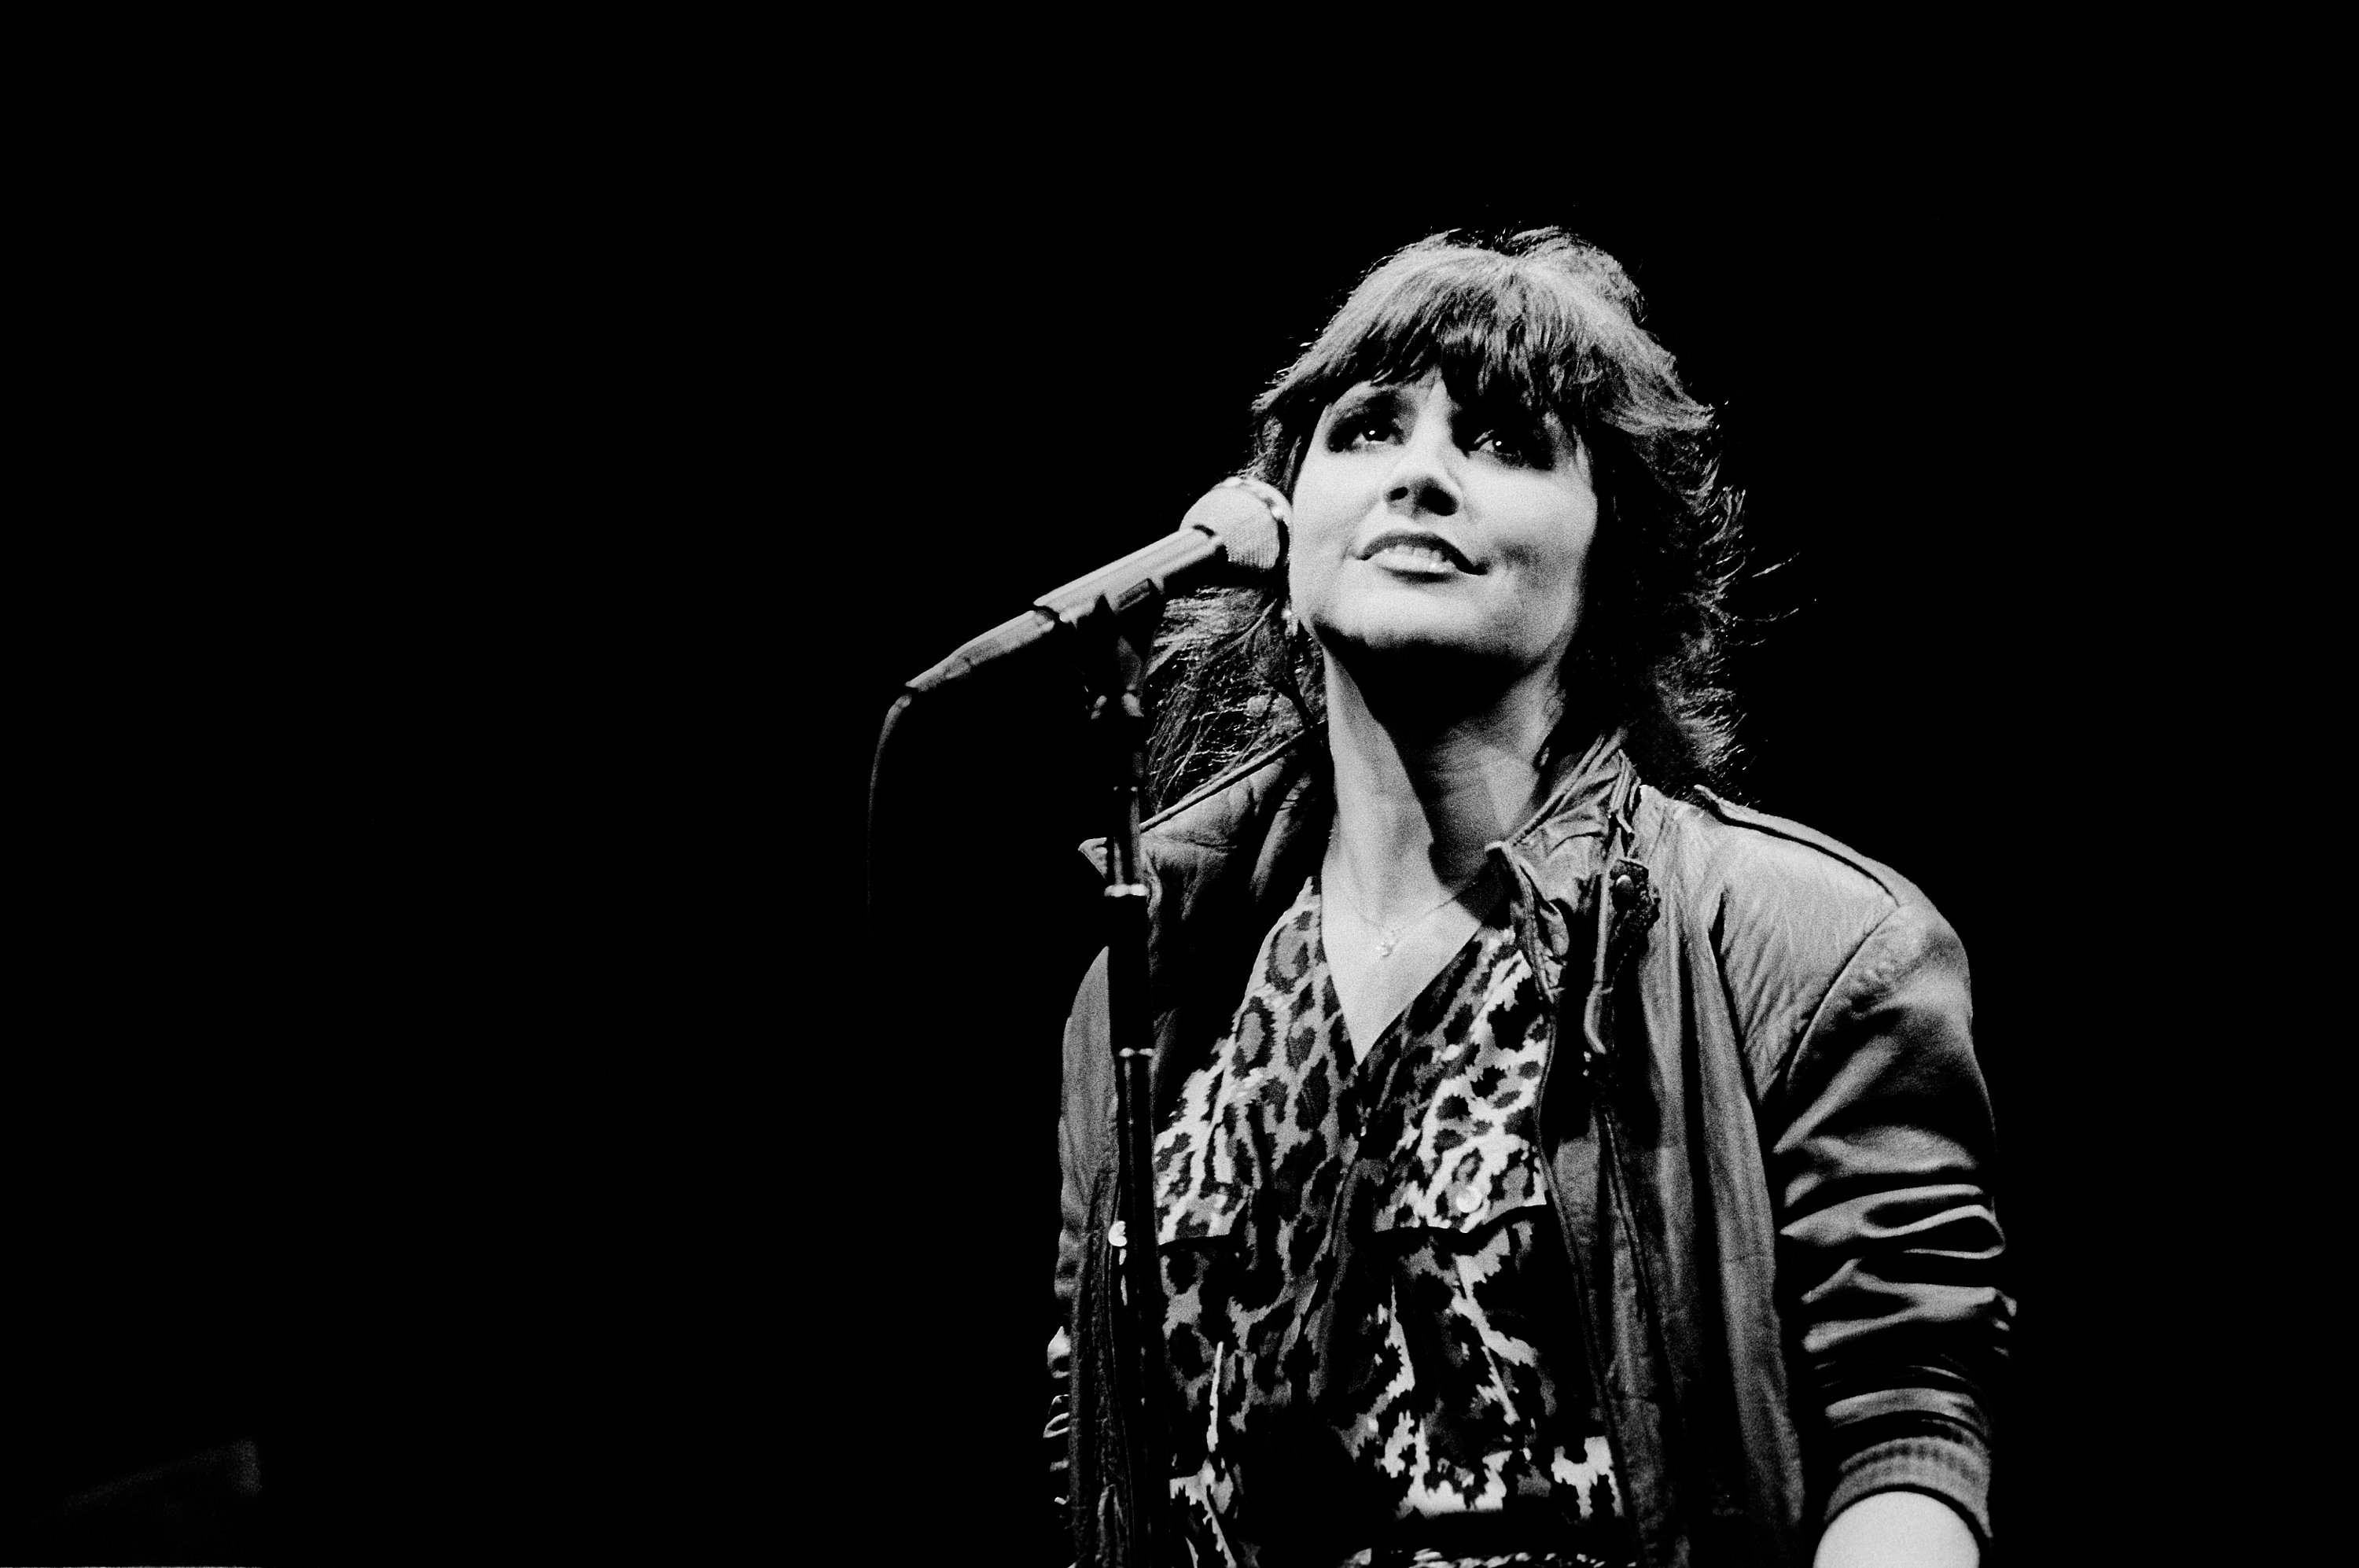 Linda Ronstadt singing a song into a microphone